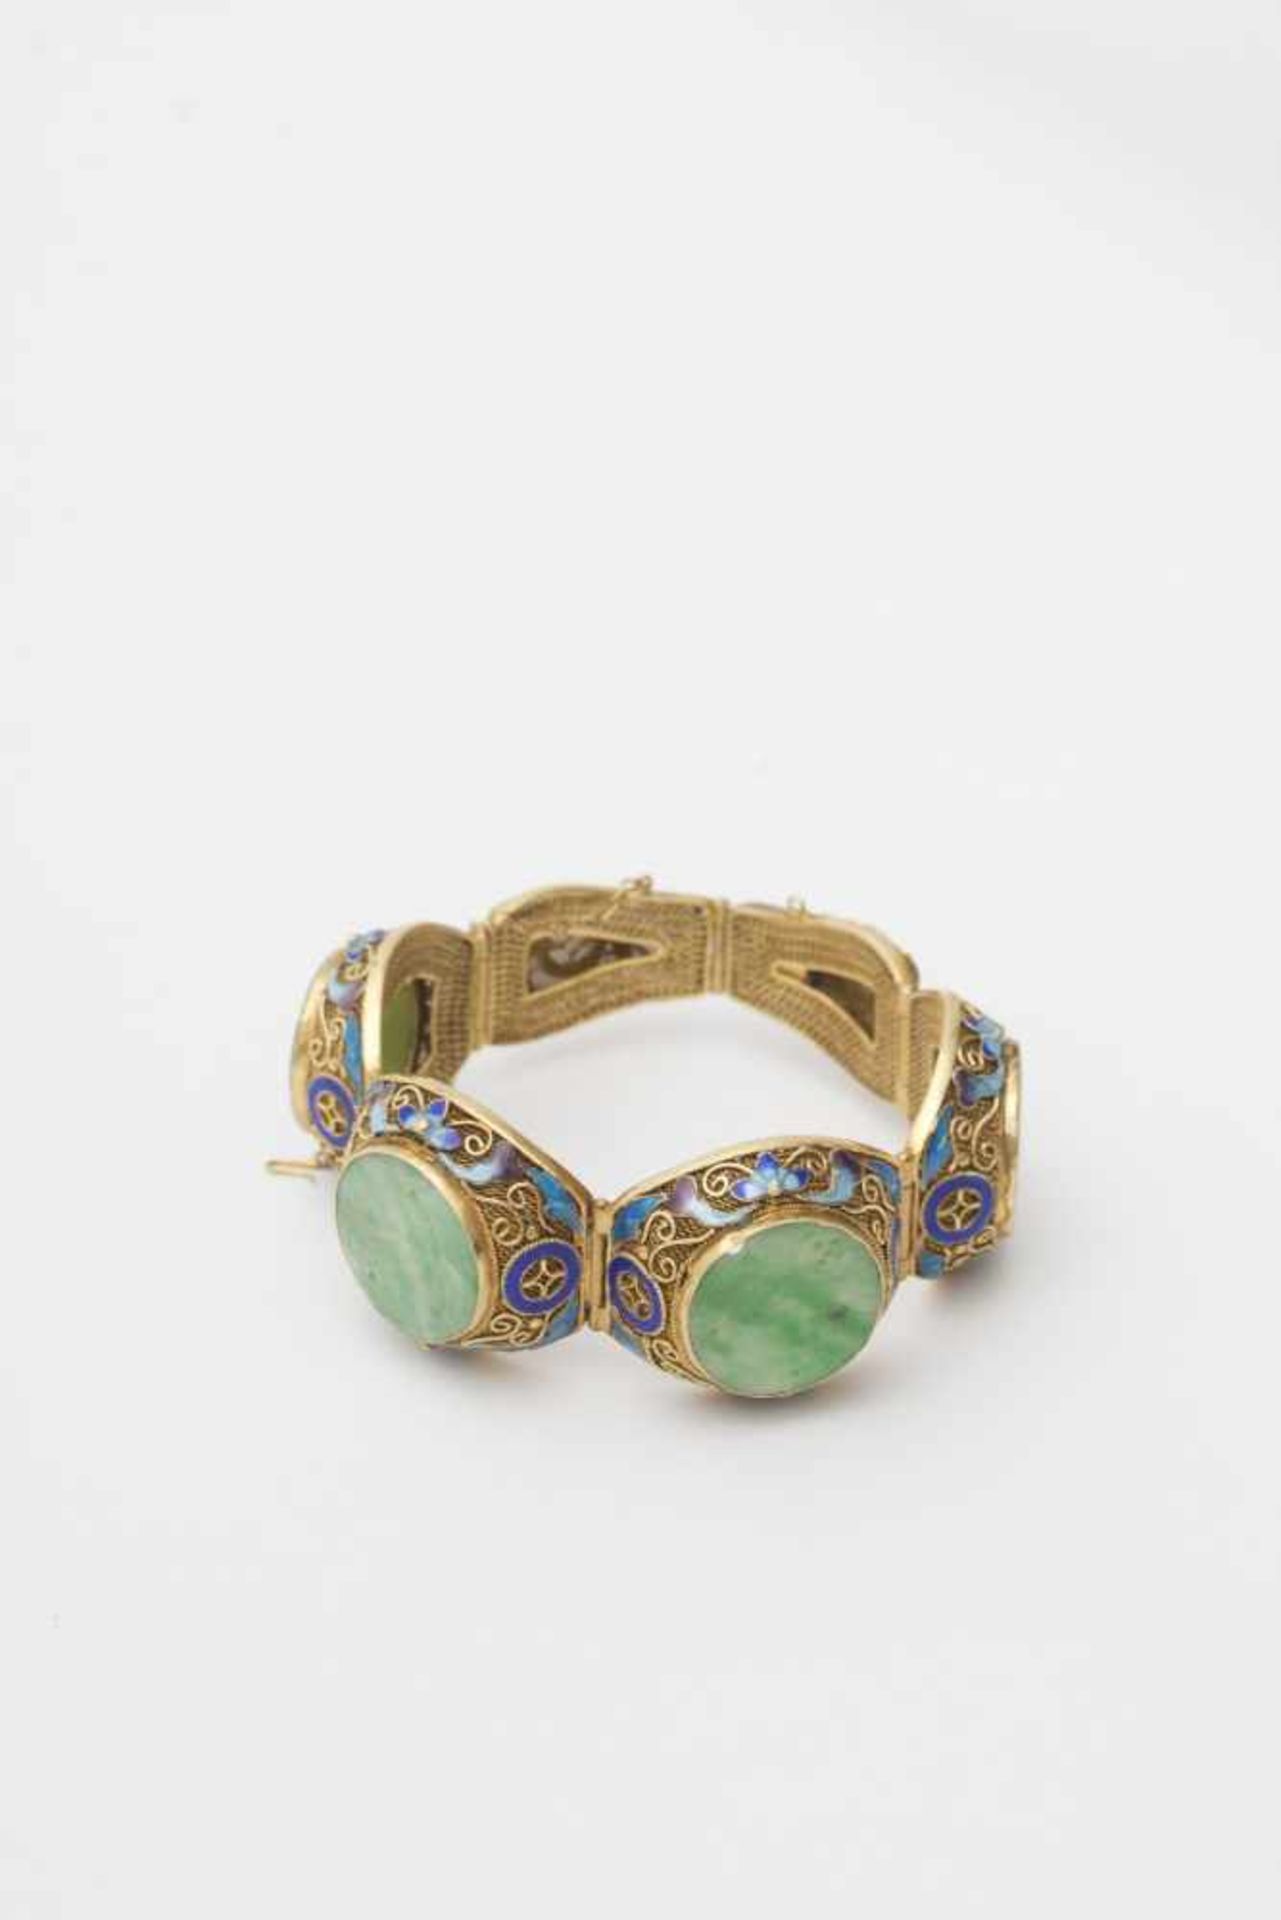 Bracelet set with jade - China, 20th century Articulated, comprised of 3 gilded silver filigree